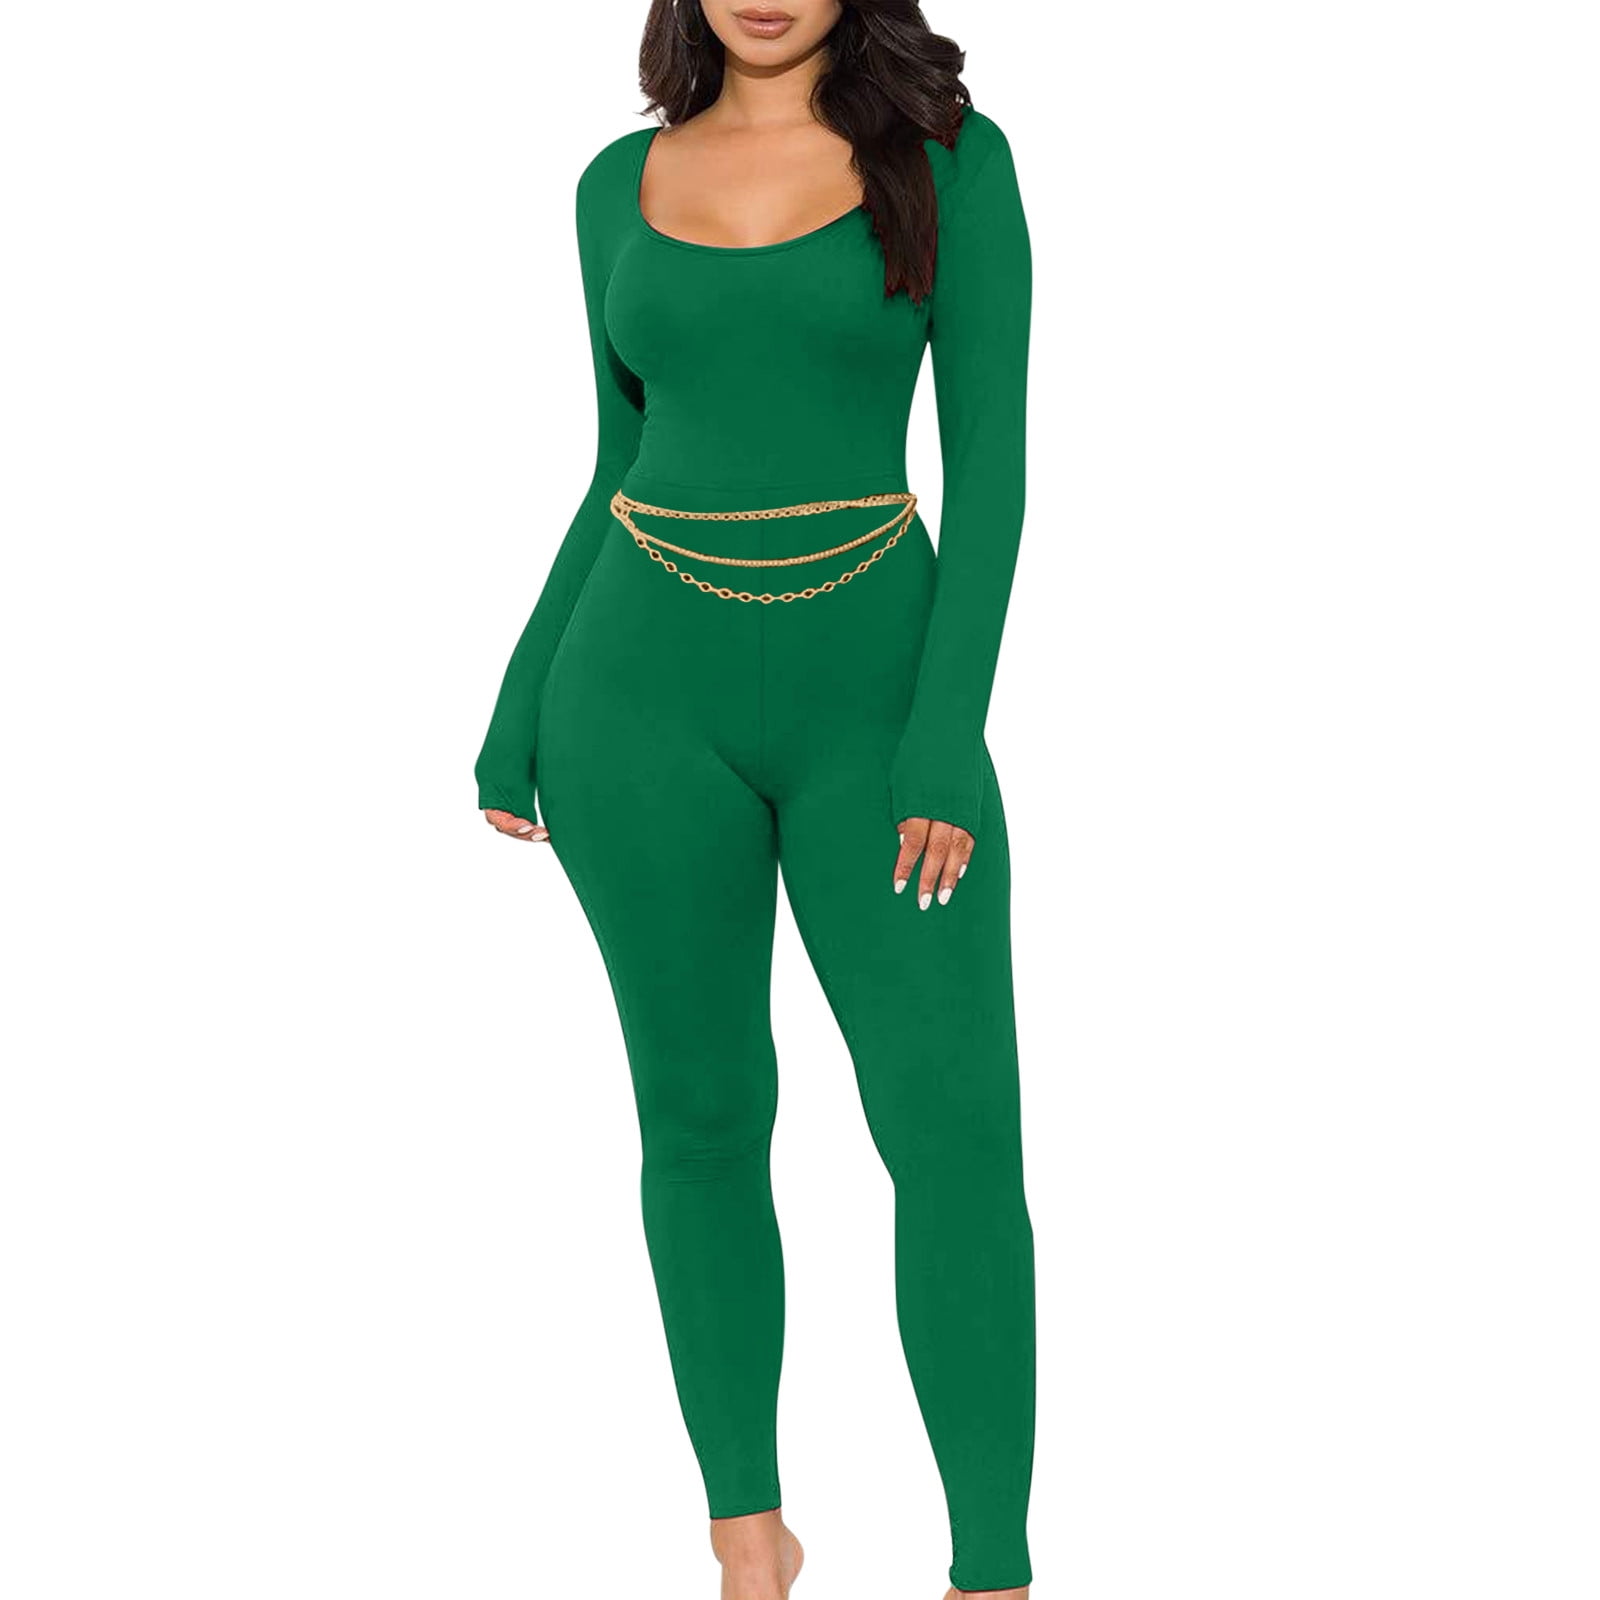 Polyester Long Sleeve Compression Spandex Yoga Jumpsuits for